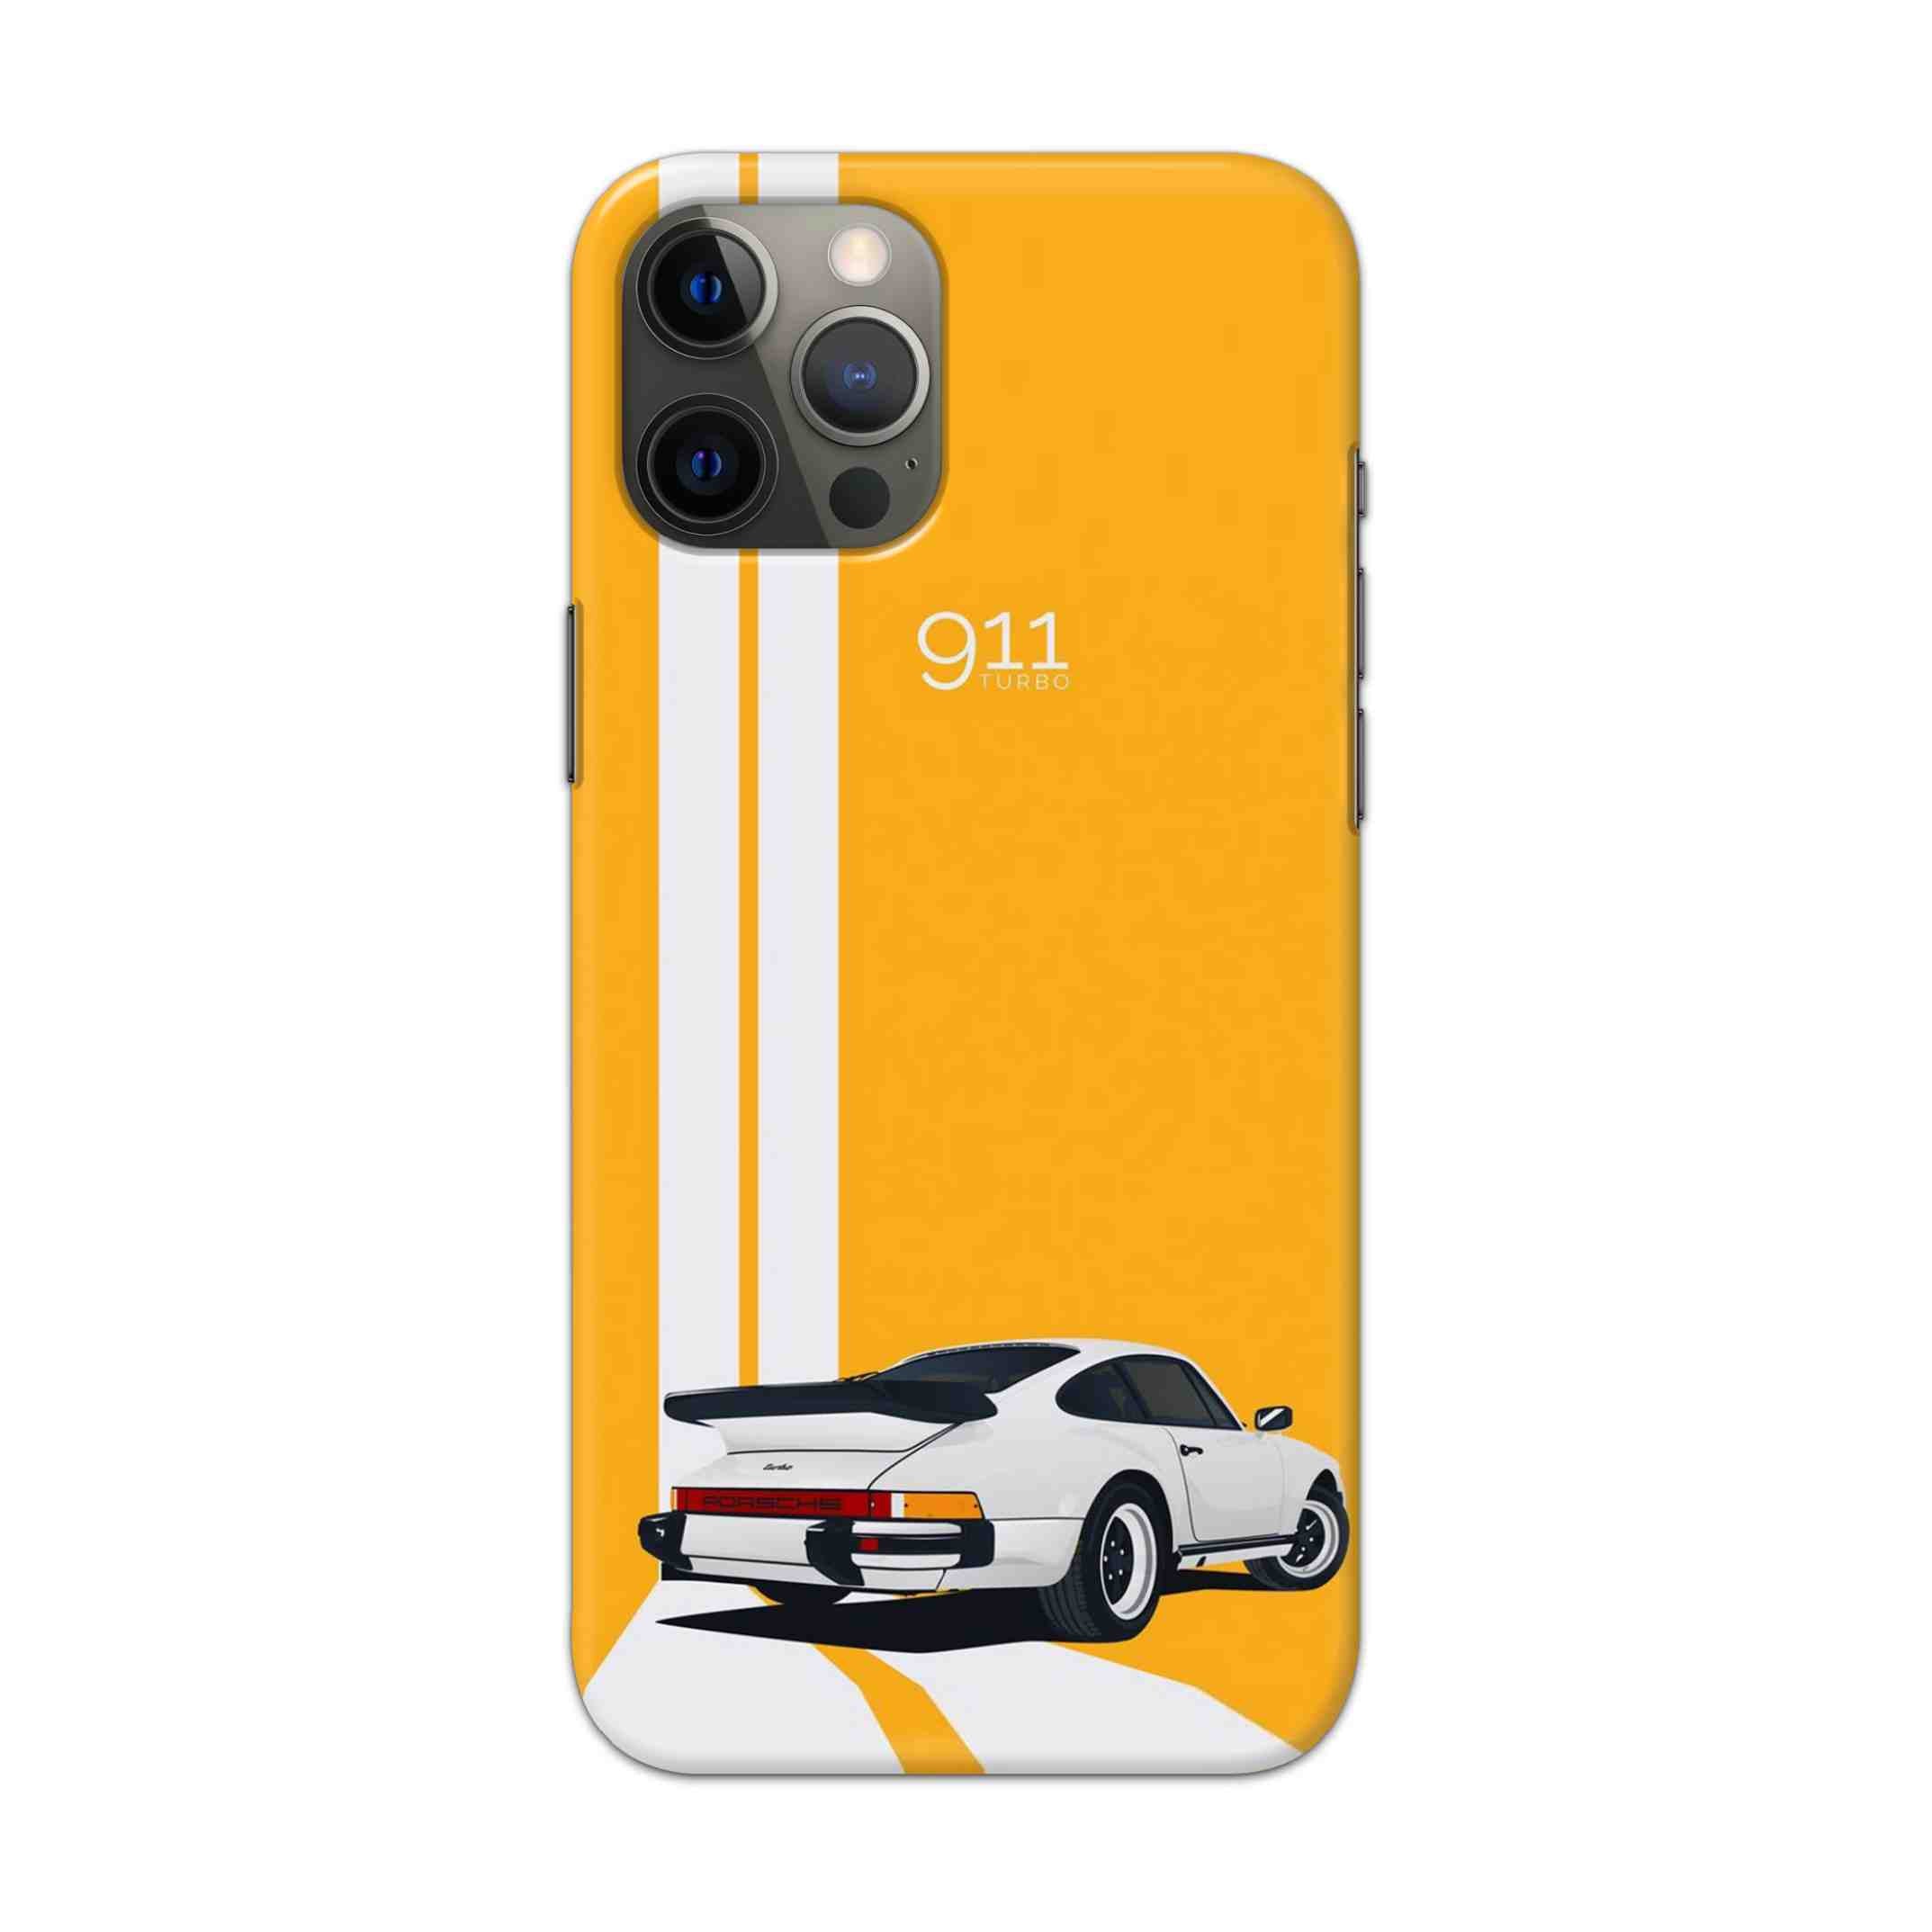 Buy 911 Gt Porche Hard Back Mobile Phone Case/Cover For Apple iPhone 12 pro Online